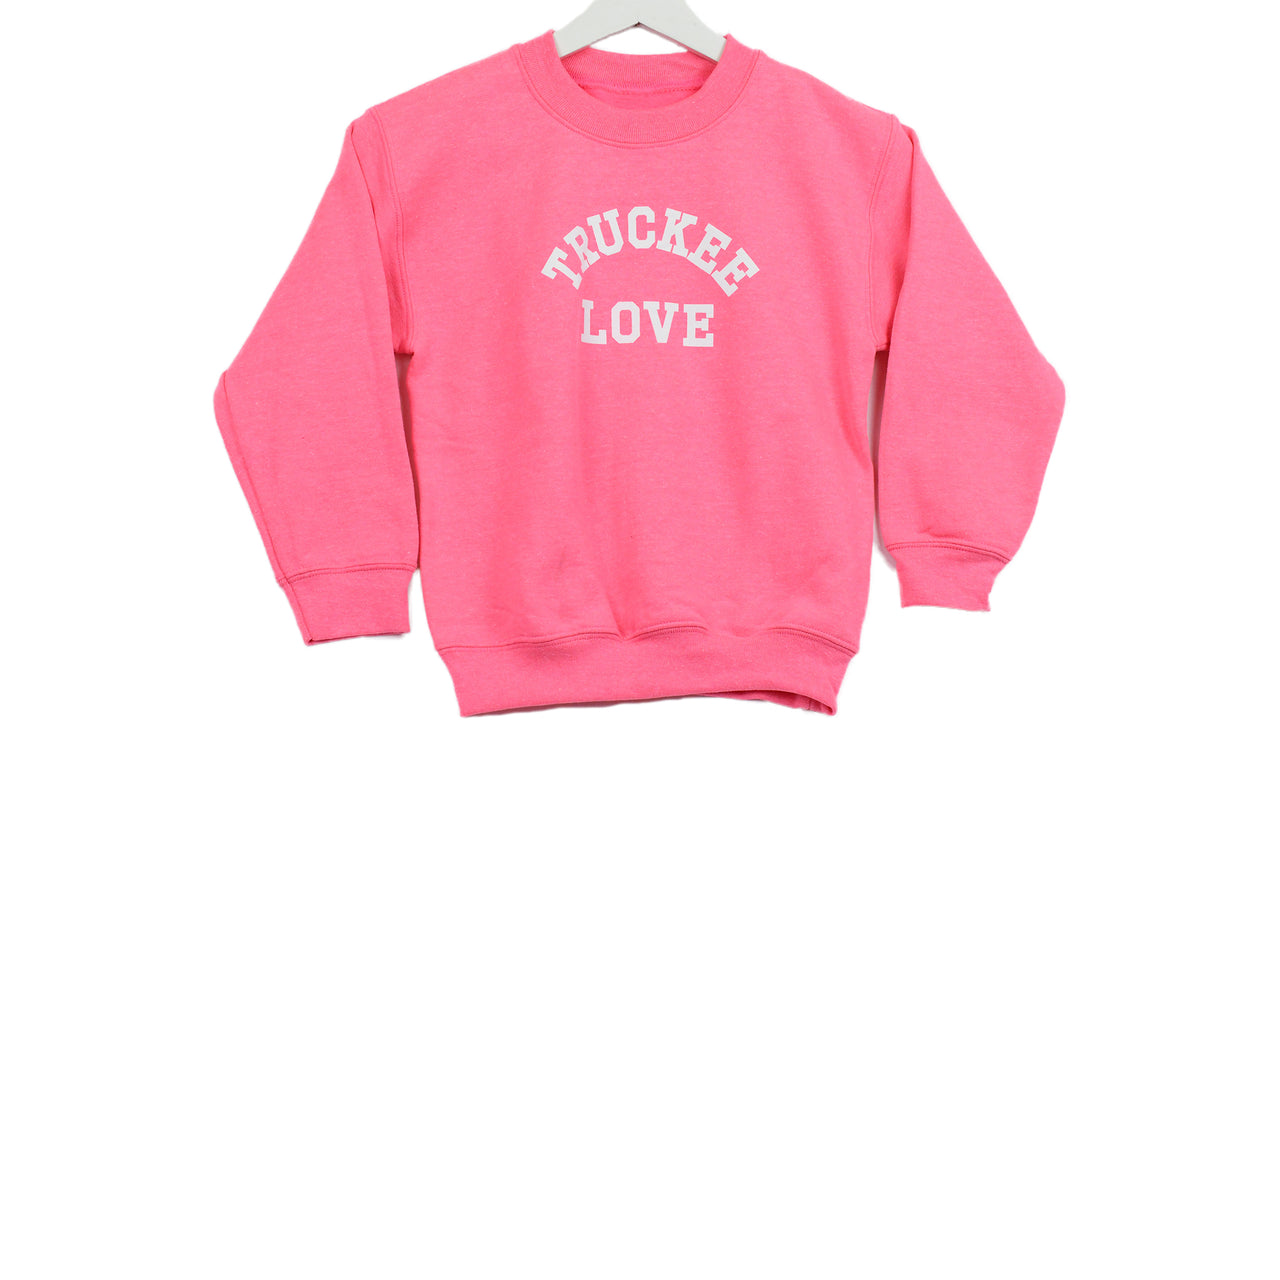 Sweatshirt-Pullover-Higher Learning-Youth